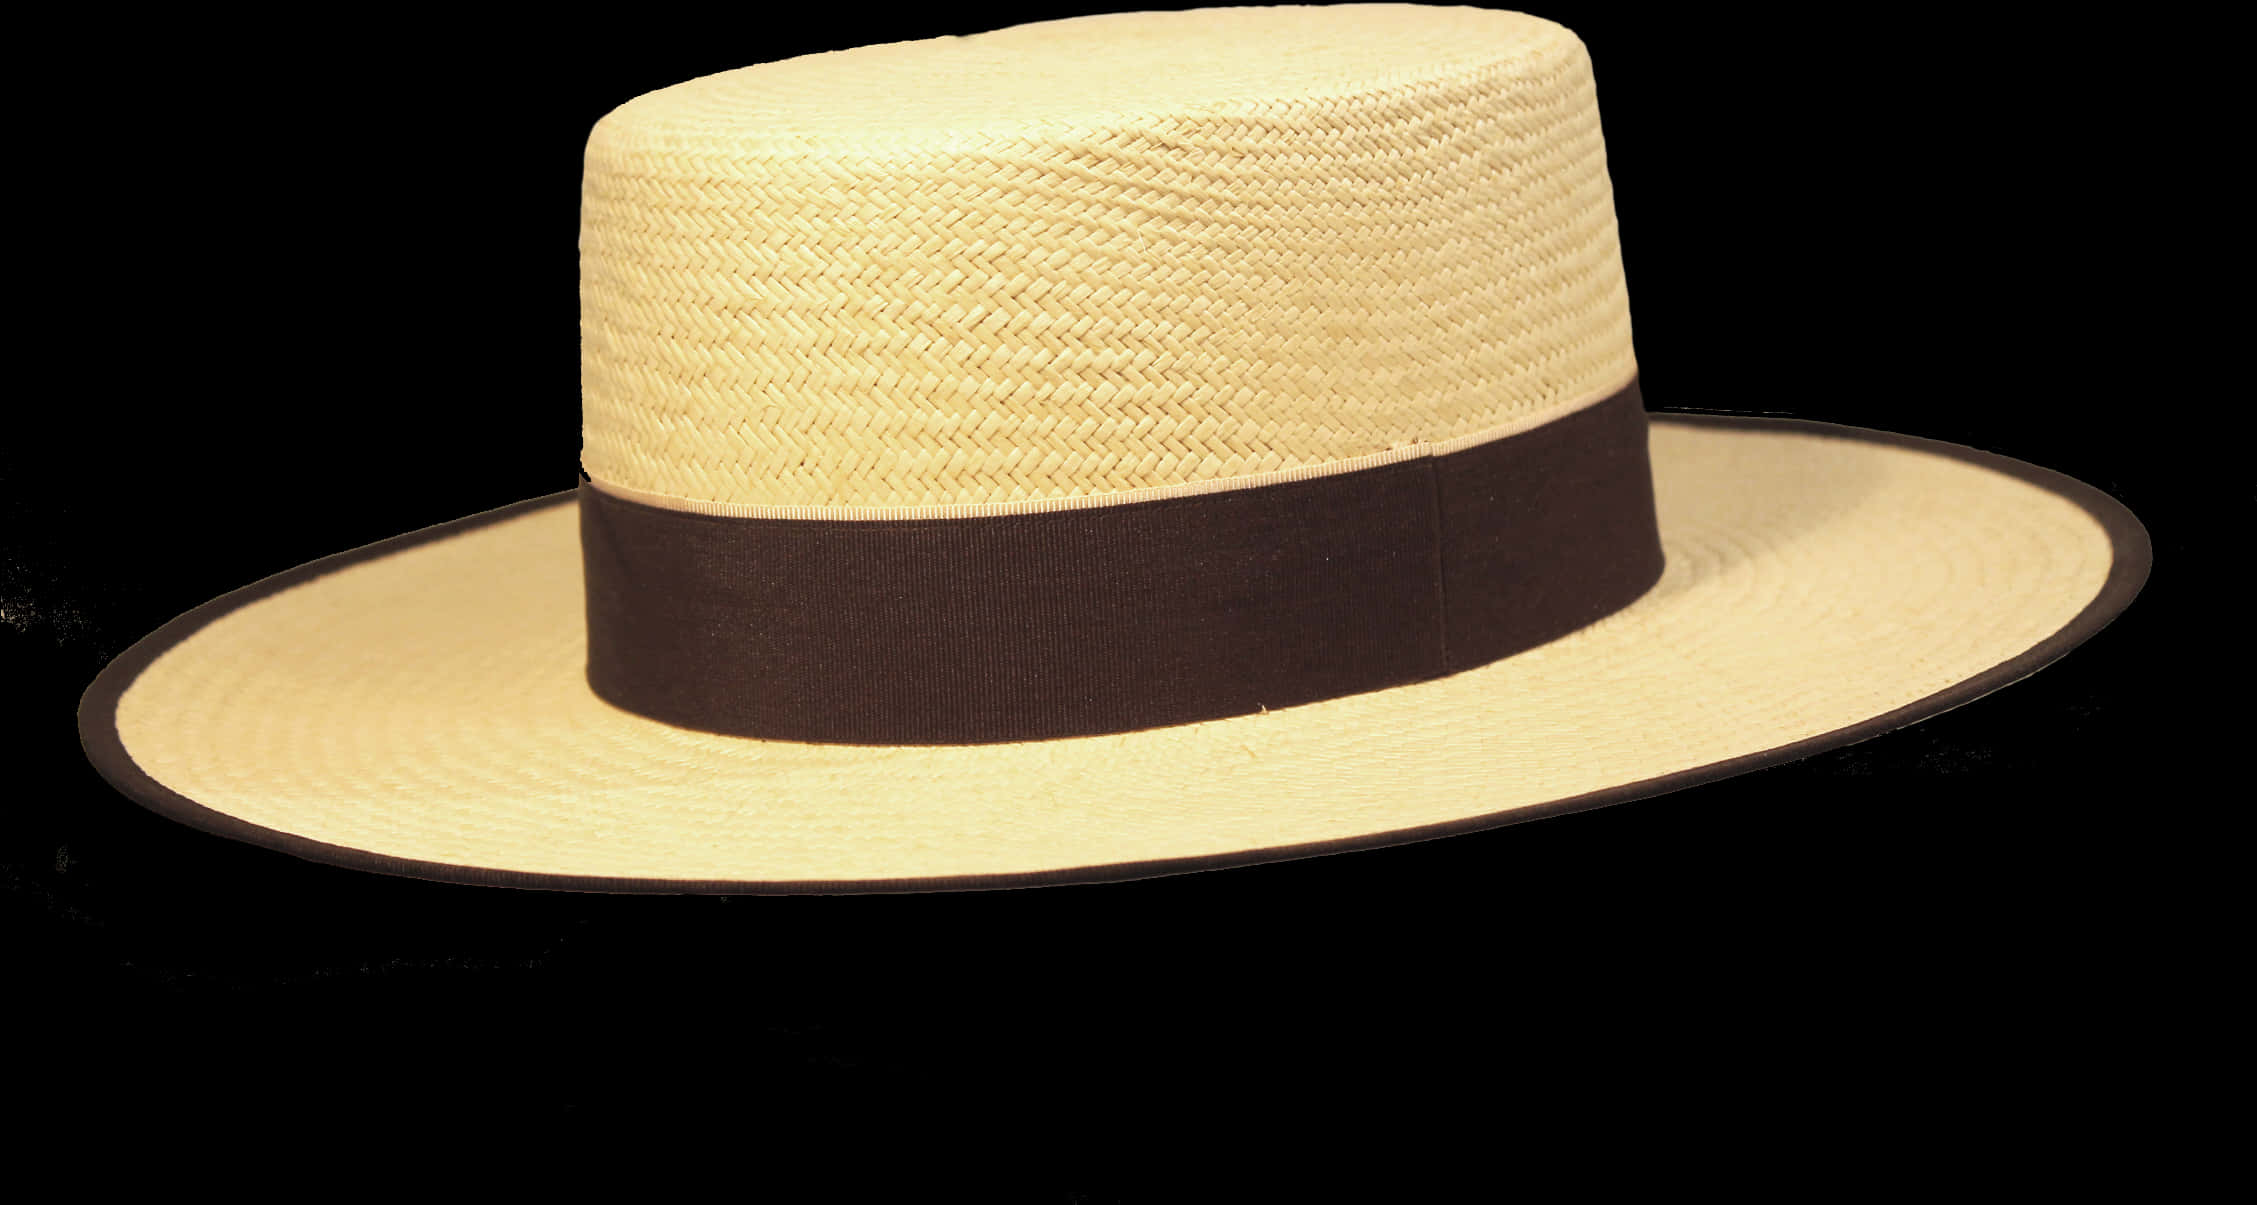 A Close-up Of A Hat